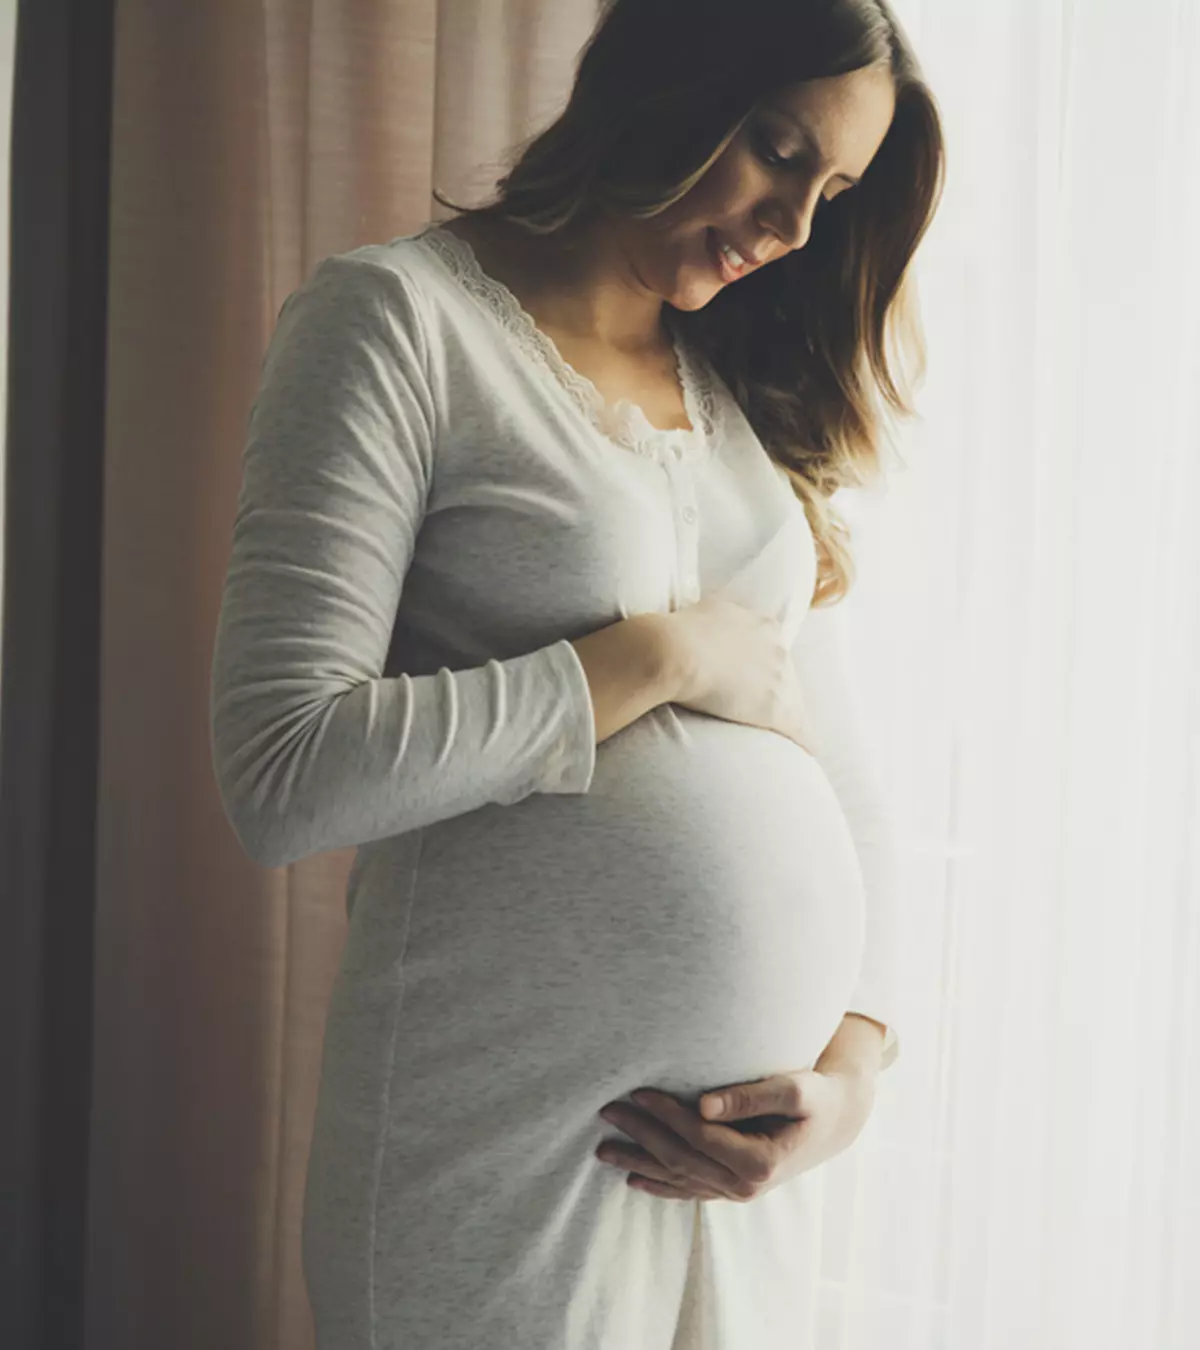 7 Unexpected Signs Of Pregnancy You Might Not Even Know About